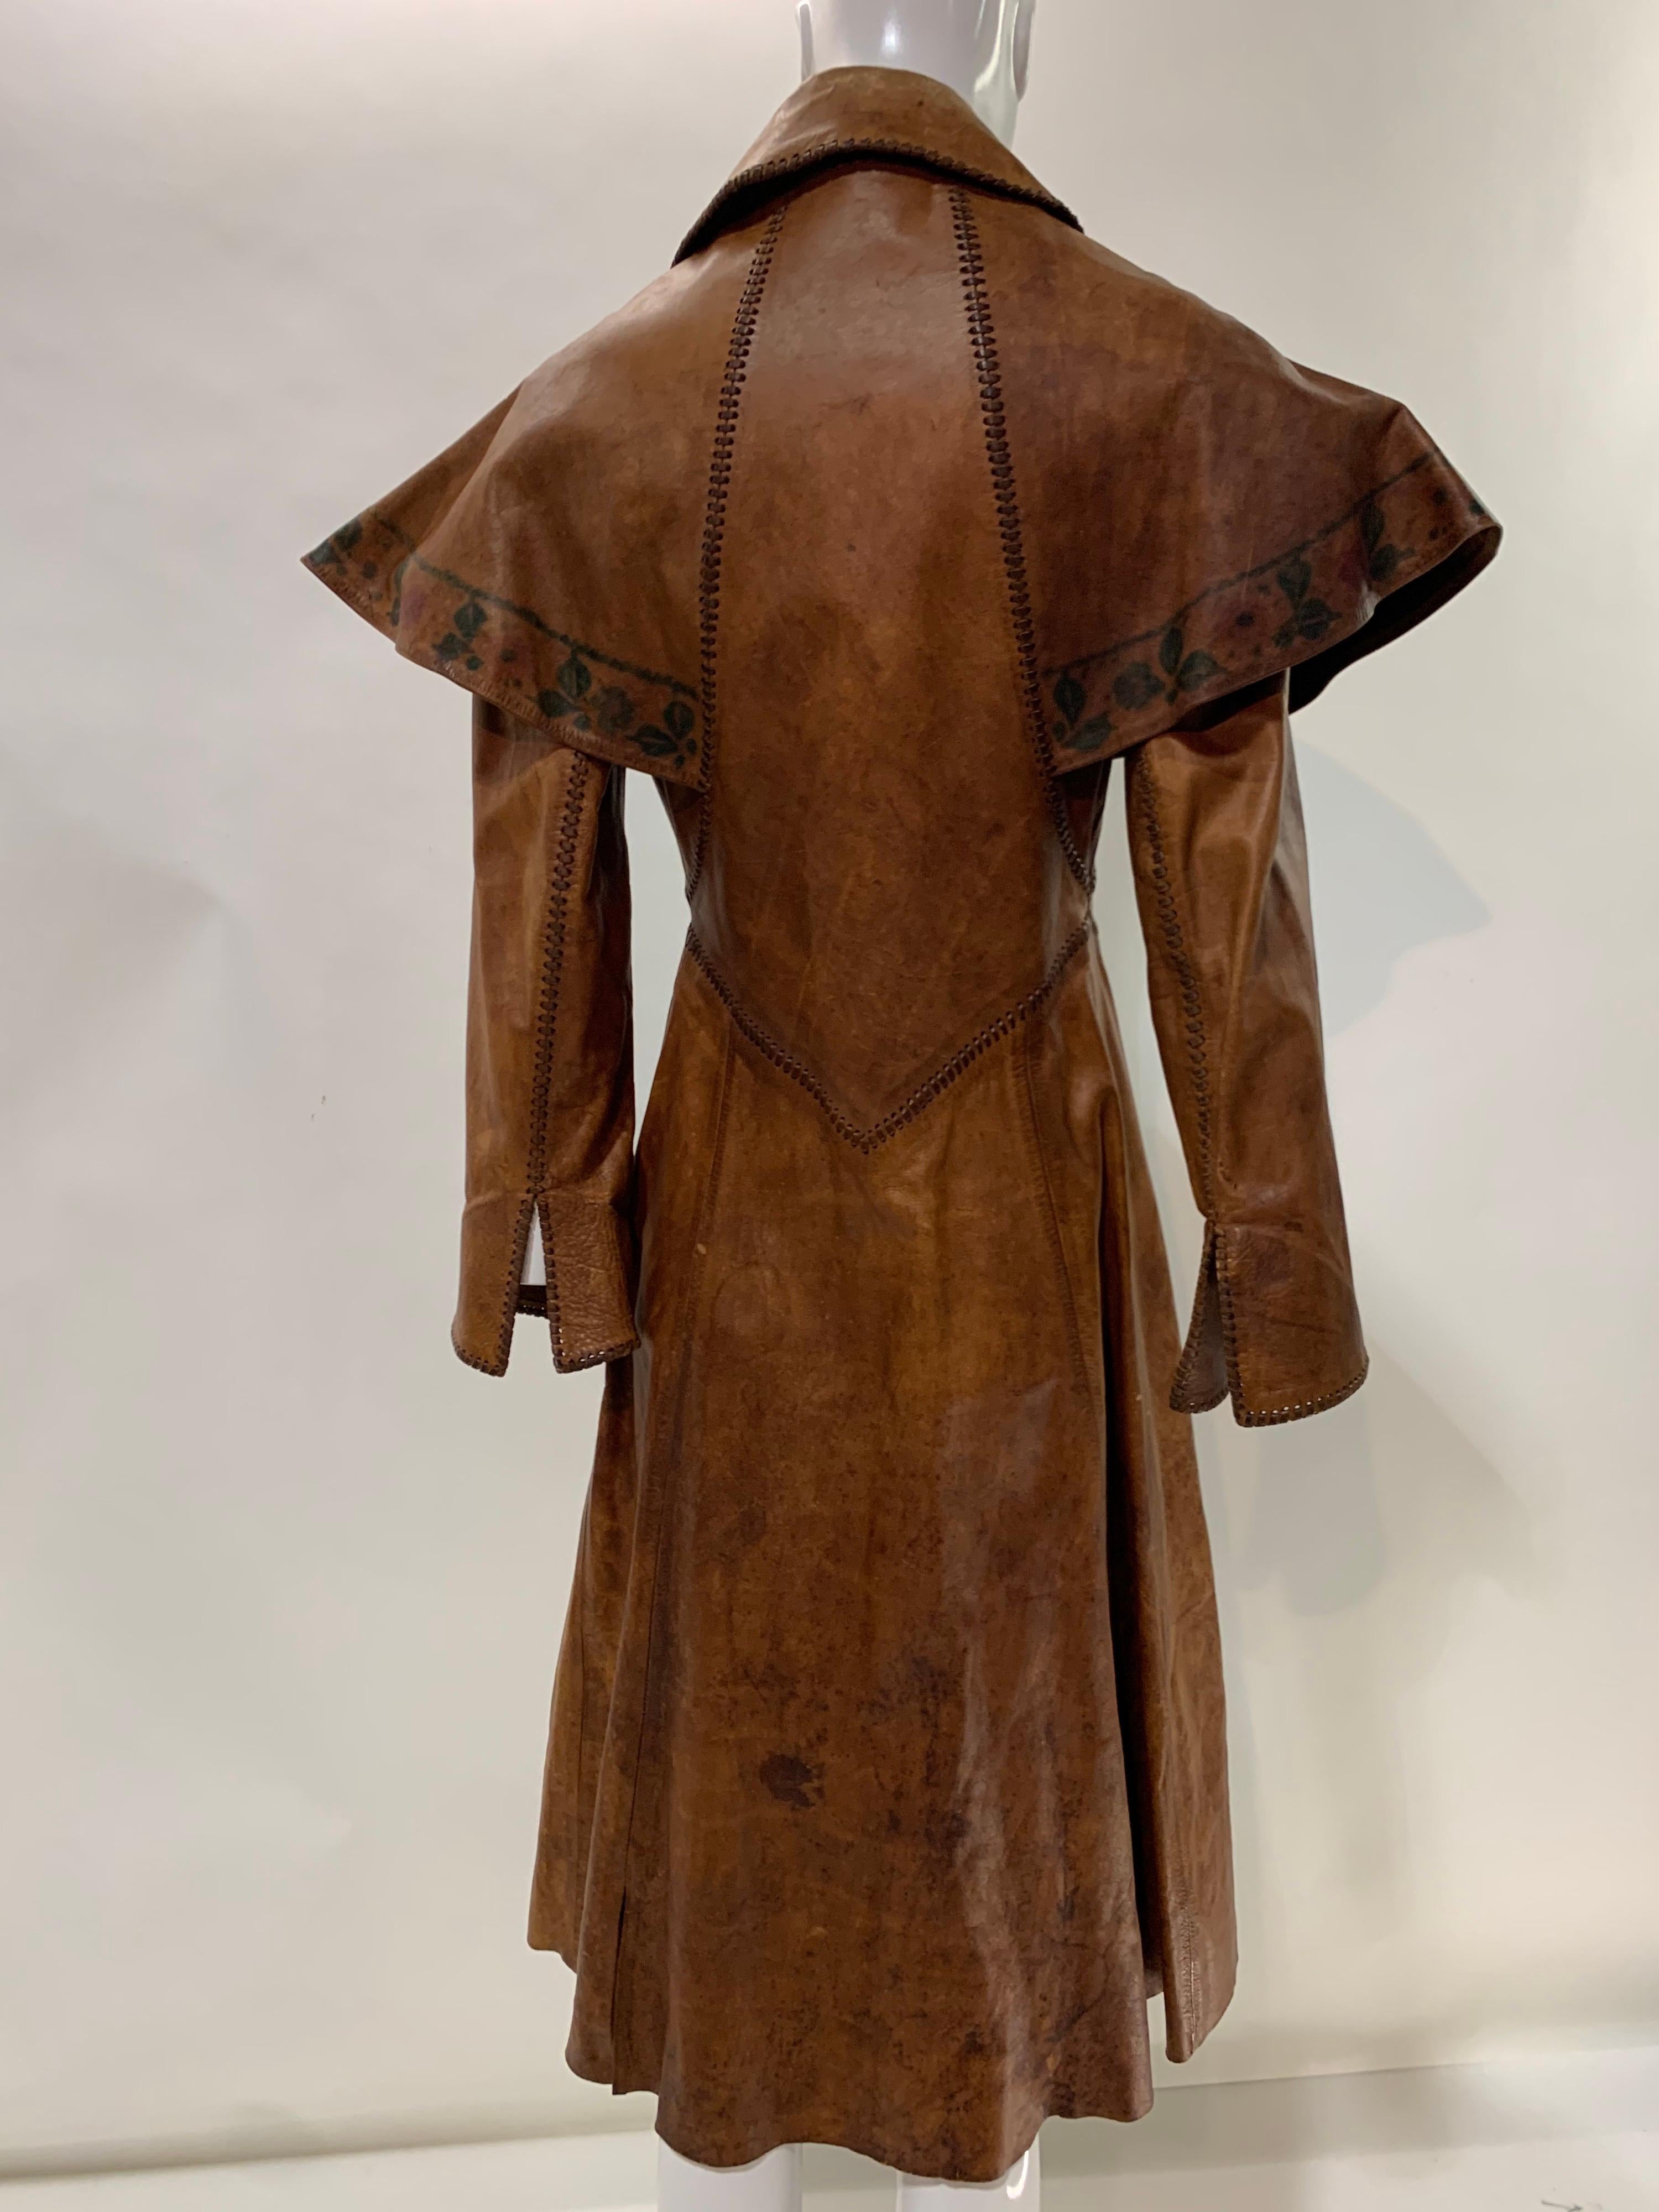 1970 Hand Made & Painted Distressed Leather Fairytale-Inspired Trench Coat  For Sale 1